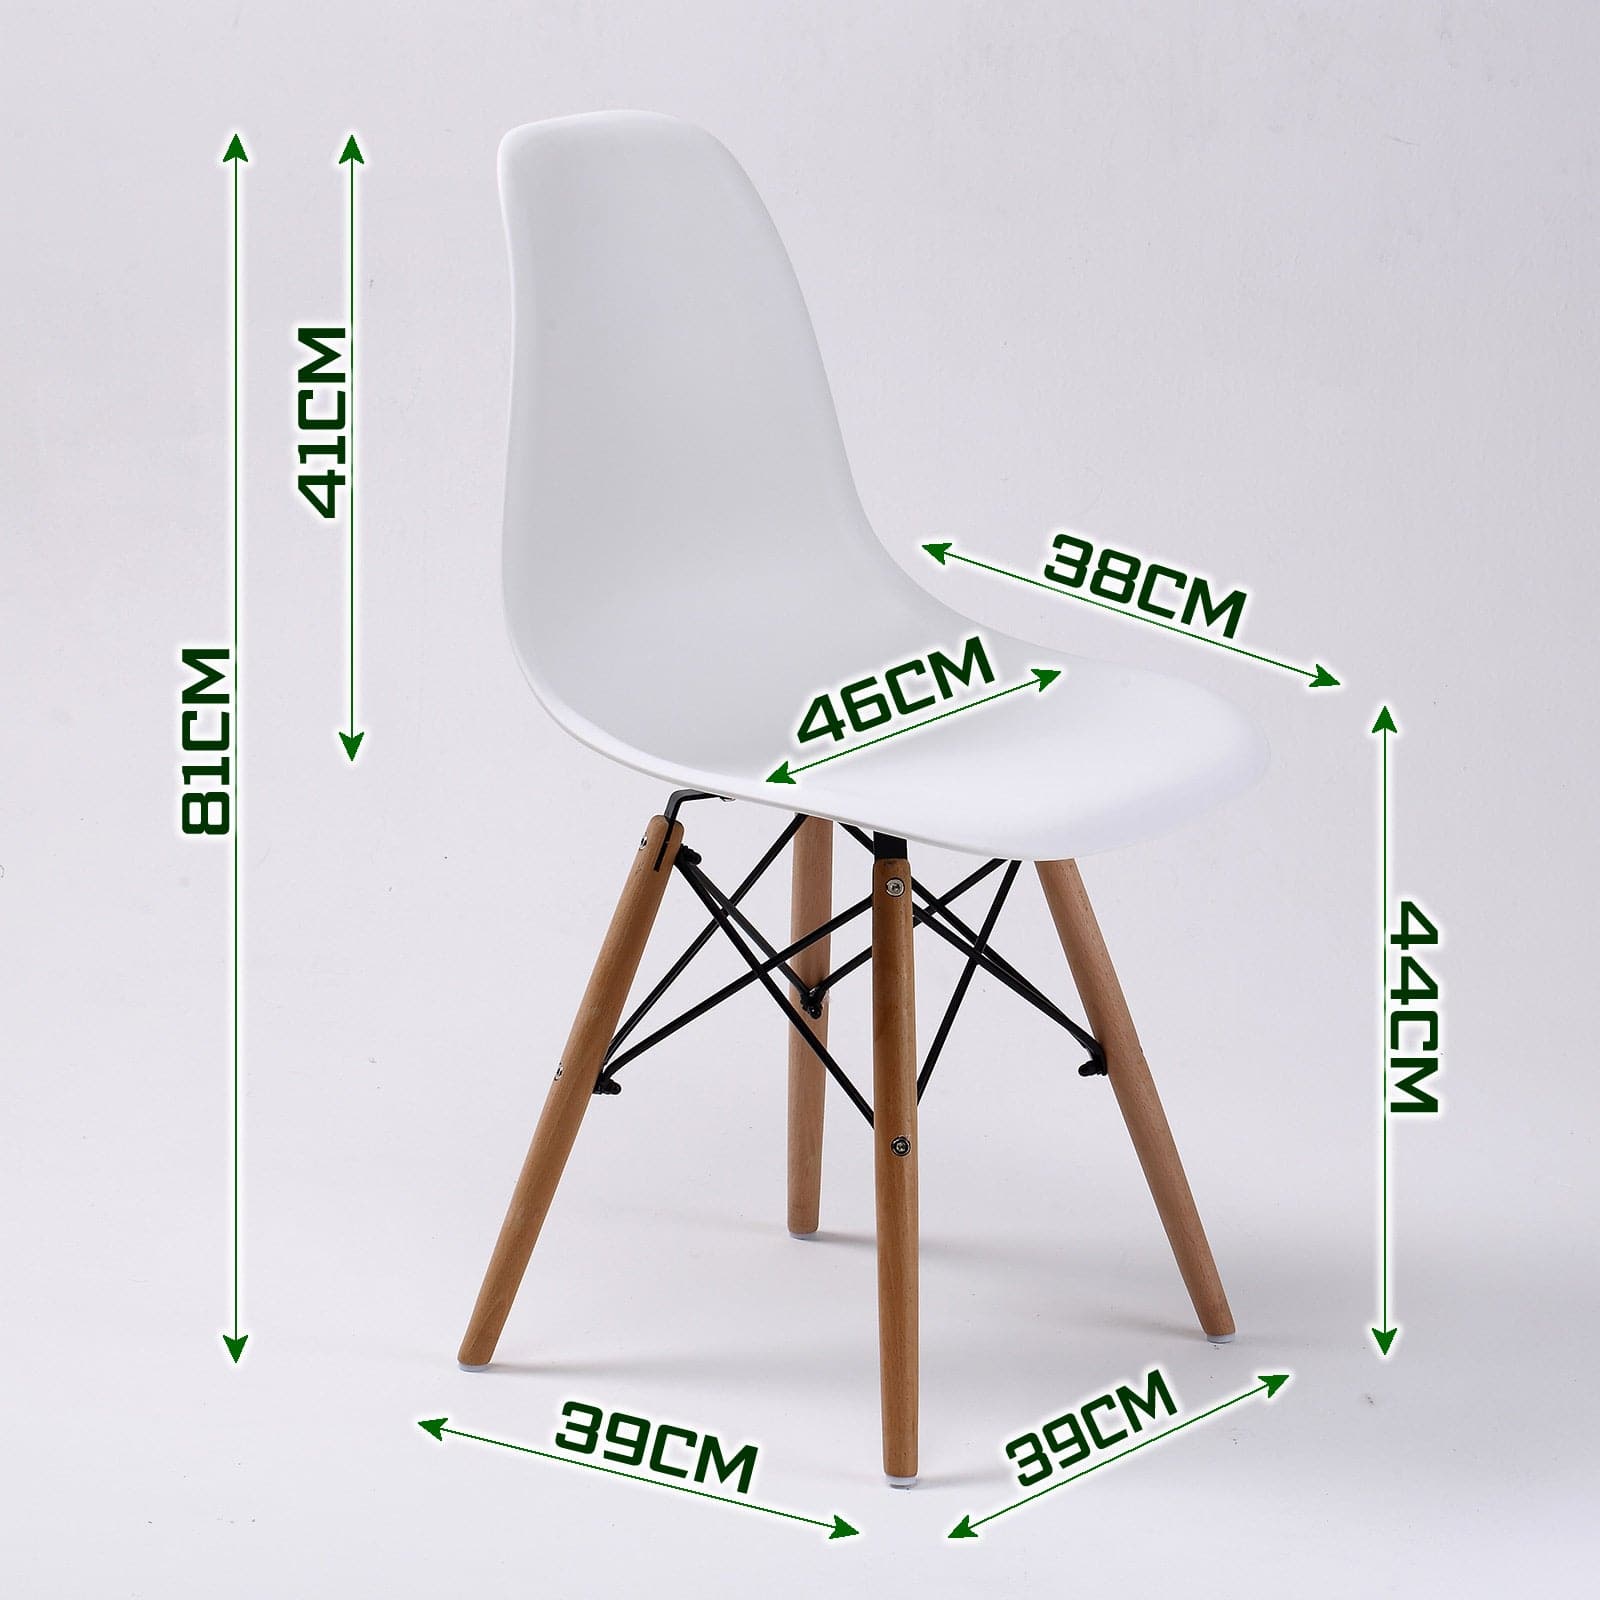 La Bella 4 Set White Retro Dining Cafe Chair DSW PP-Furniture &gt; Bar Stools &amp; Chairs-PEROZ Accessories